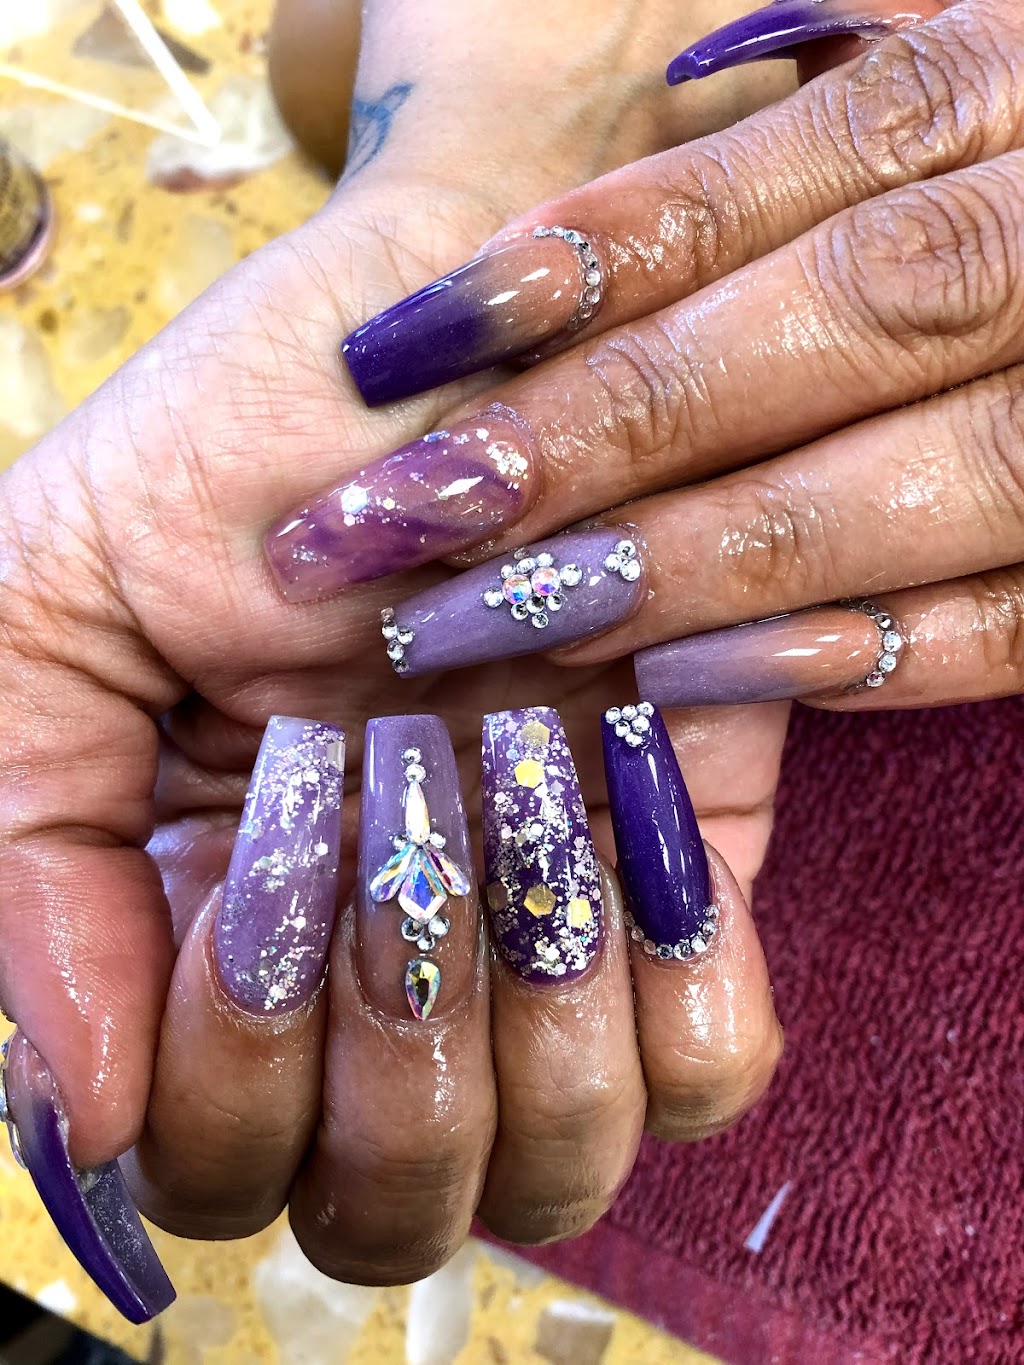 GLAZE NAILS | 1640 S State Hwy 121 #140, Lewisville, TX 75067 | Phone: (972) 956-9490